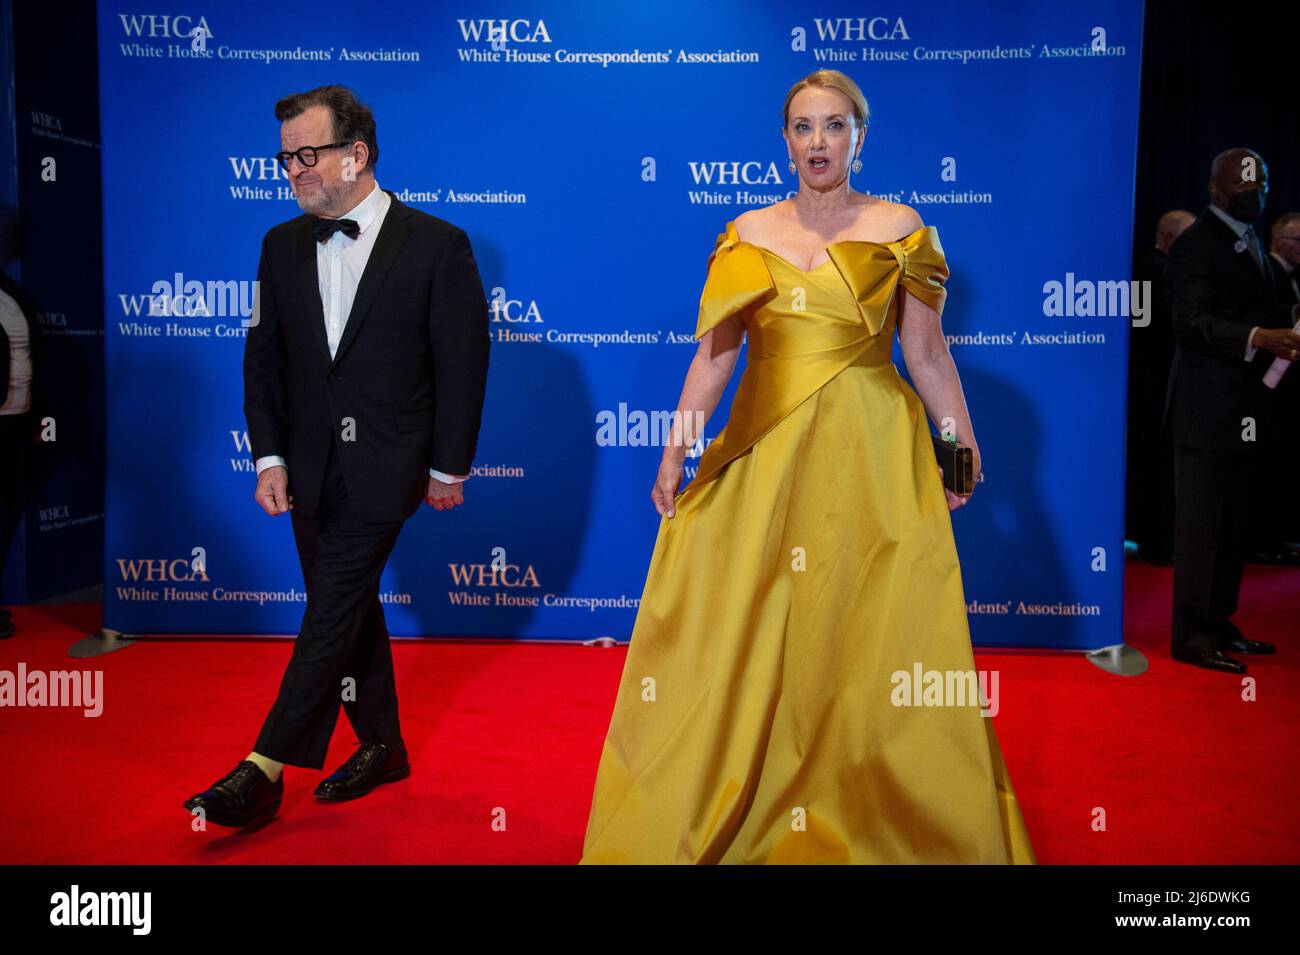 Kenneth Lonergan, left, and J. Smith-Cameron arrive for the 2022 White House Correspondents Association Annual Dinner at the Washington Hilton Hotel on Saturday, April 30, 2022. This is the first time since 2019 that the WHCA has held its annual dinner due to the COVID-19 pandemic. Credit: Rod Lamkey / CNP Stock Photo